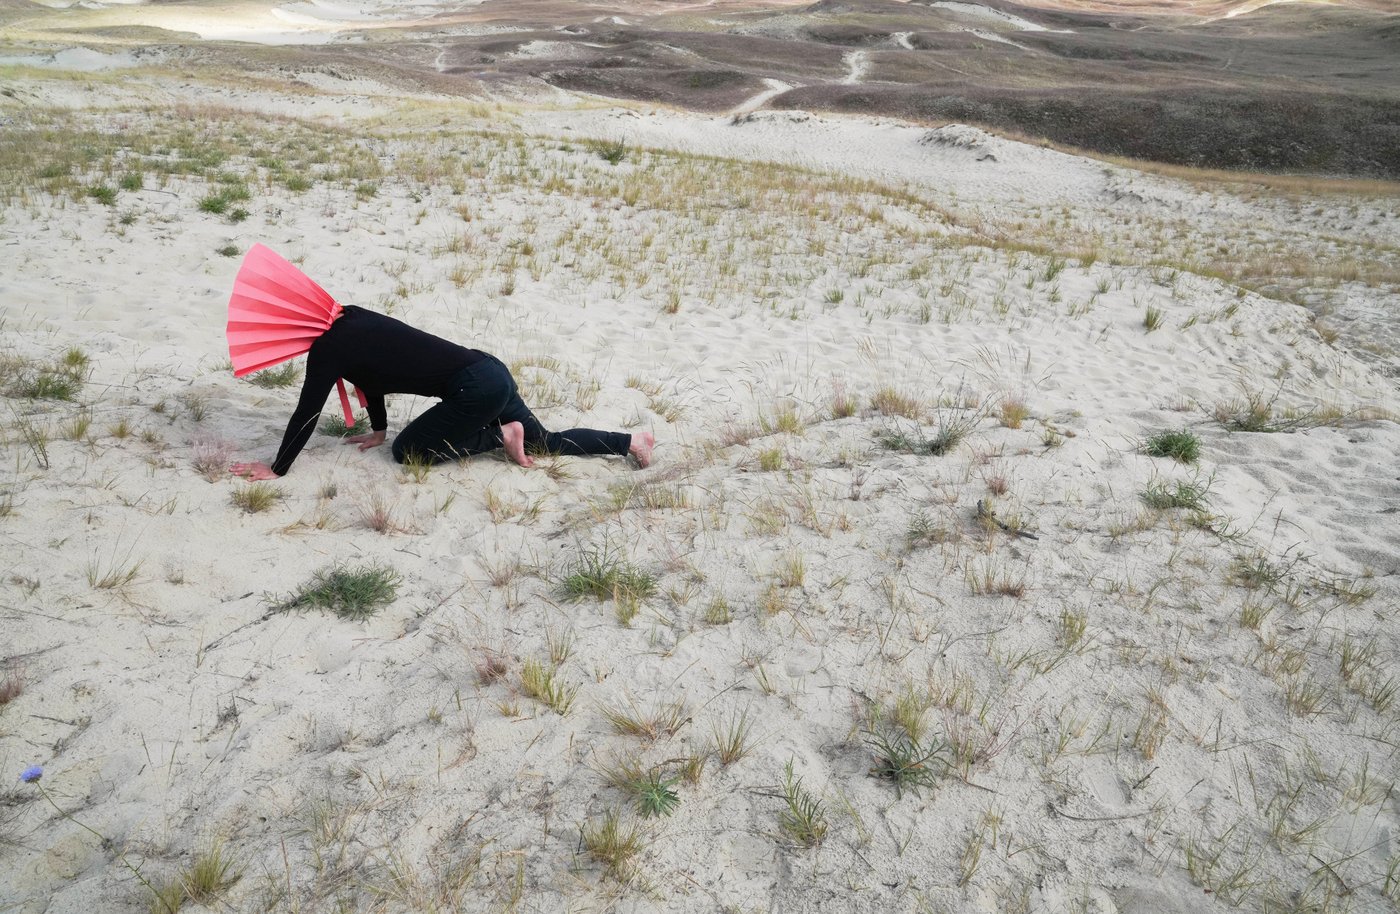 Person crawling on the ground of a desert